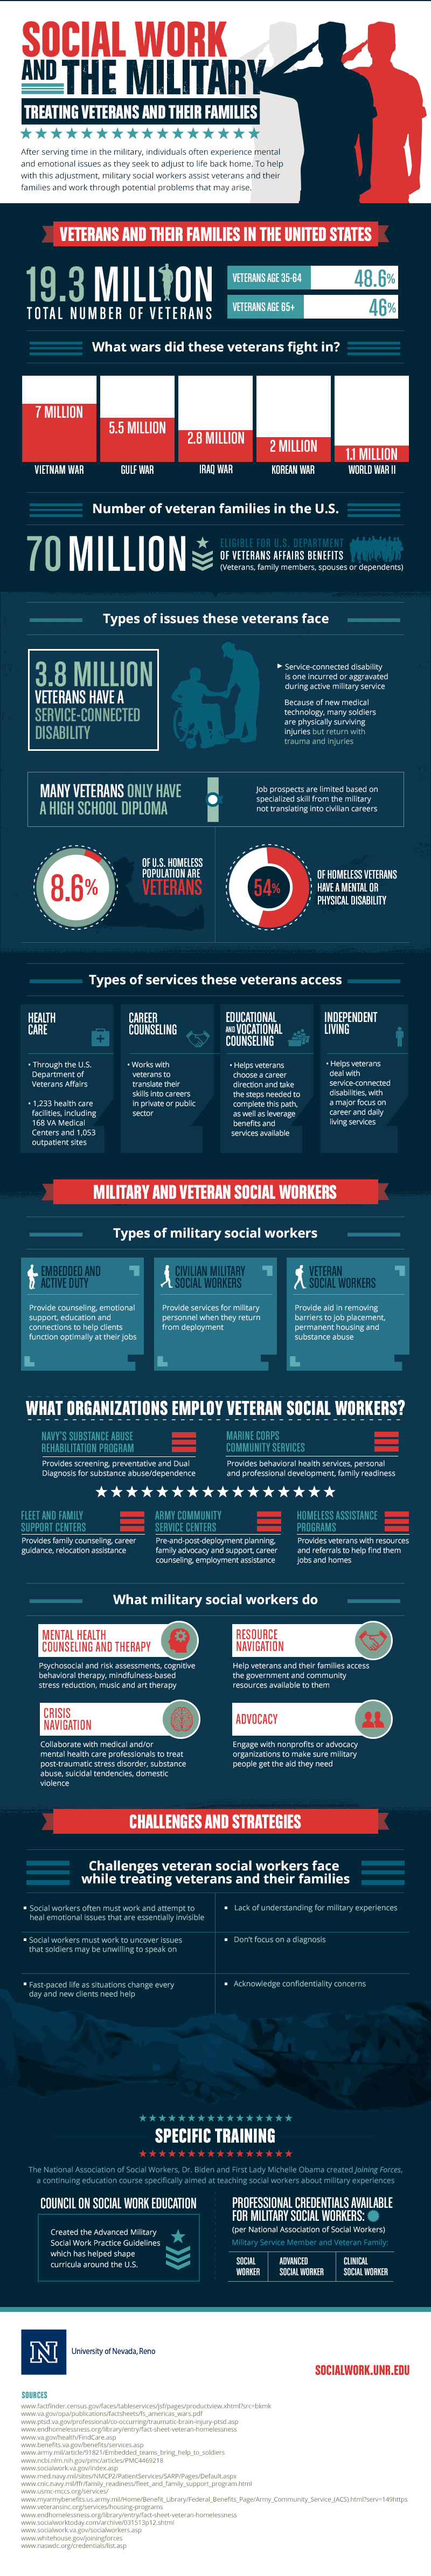 How Social Workers Help Veterans and Their Families.